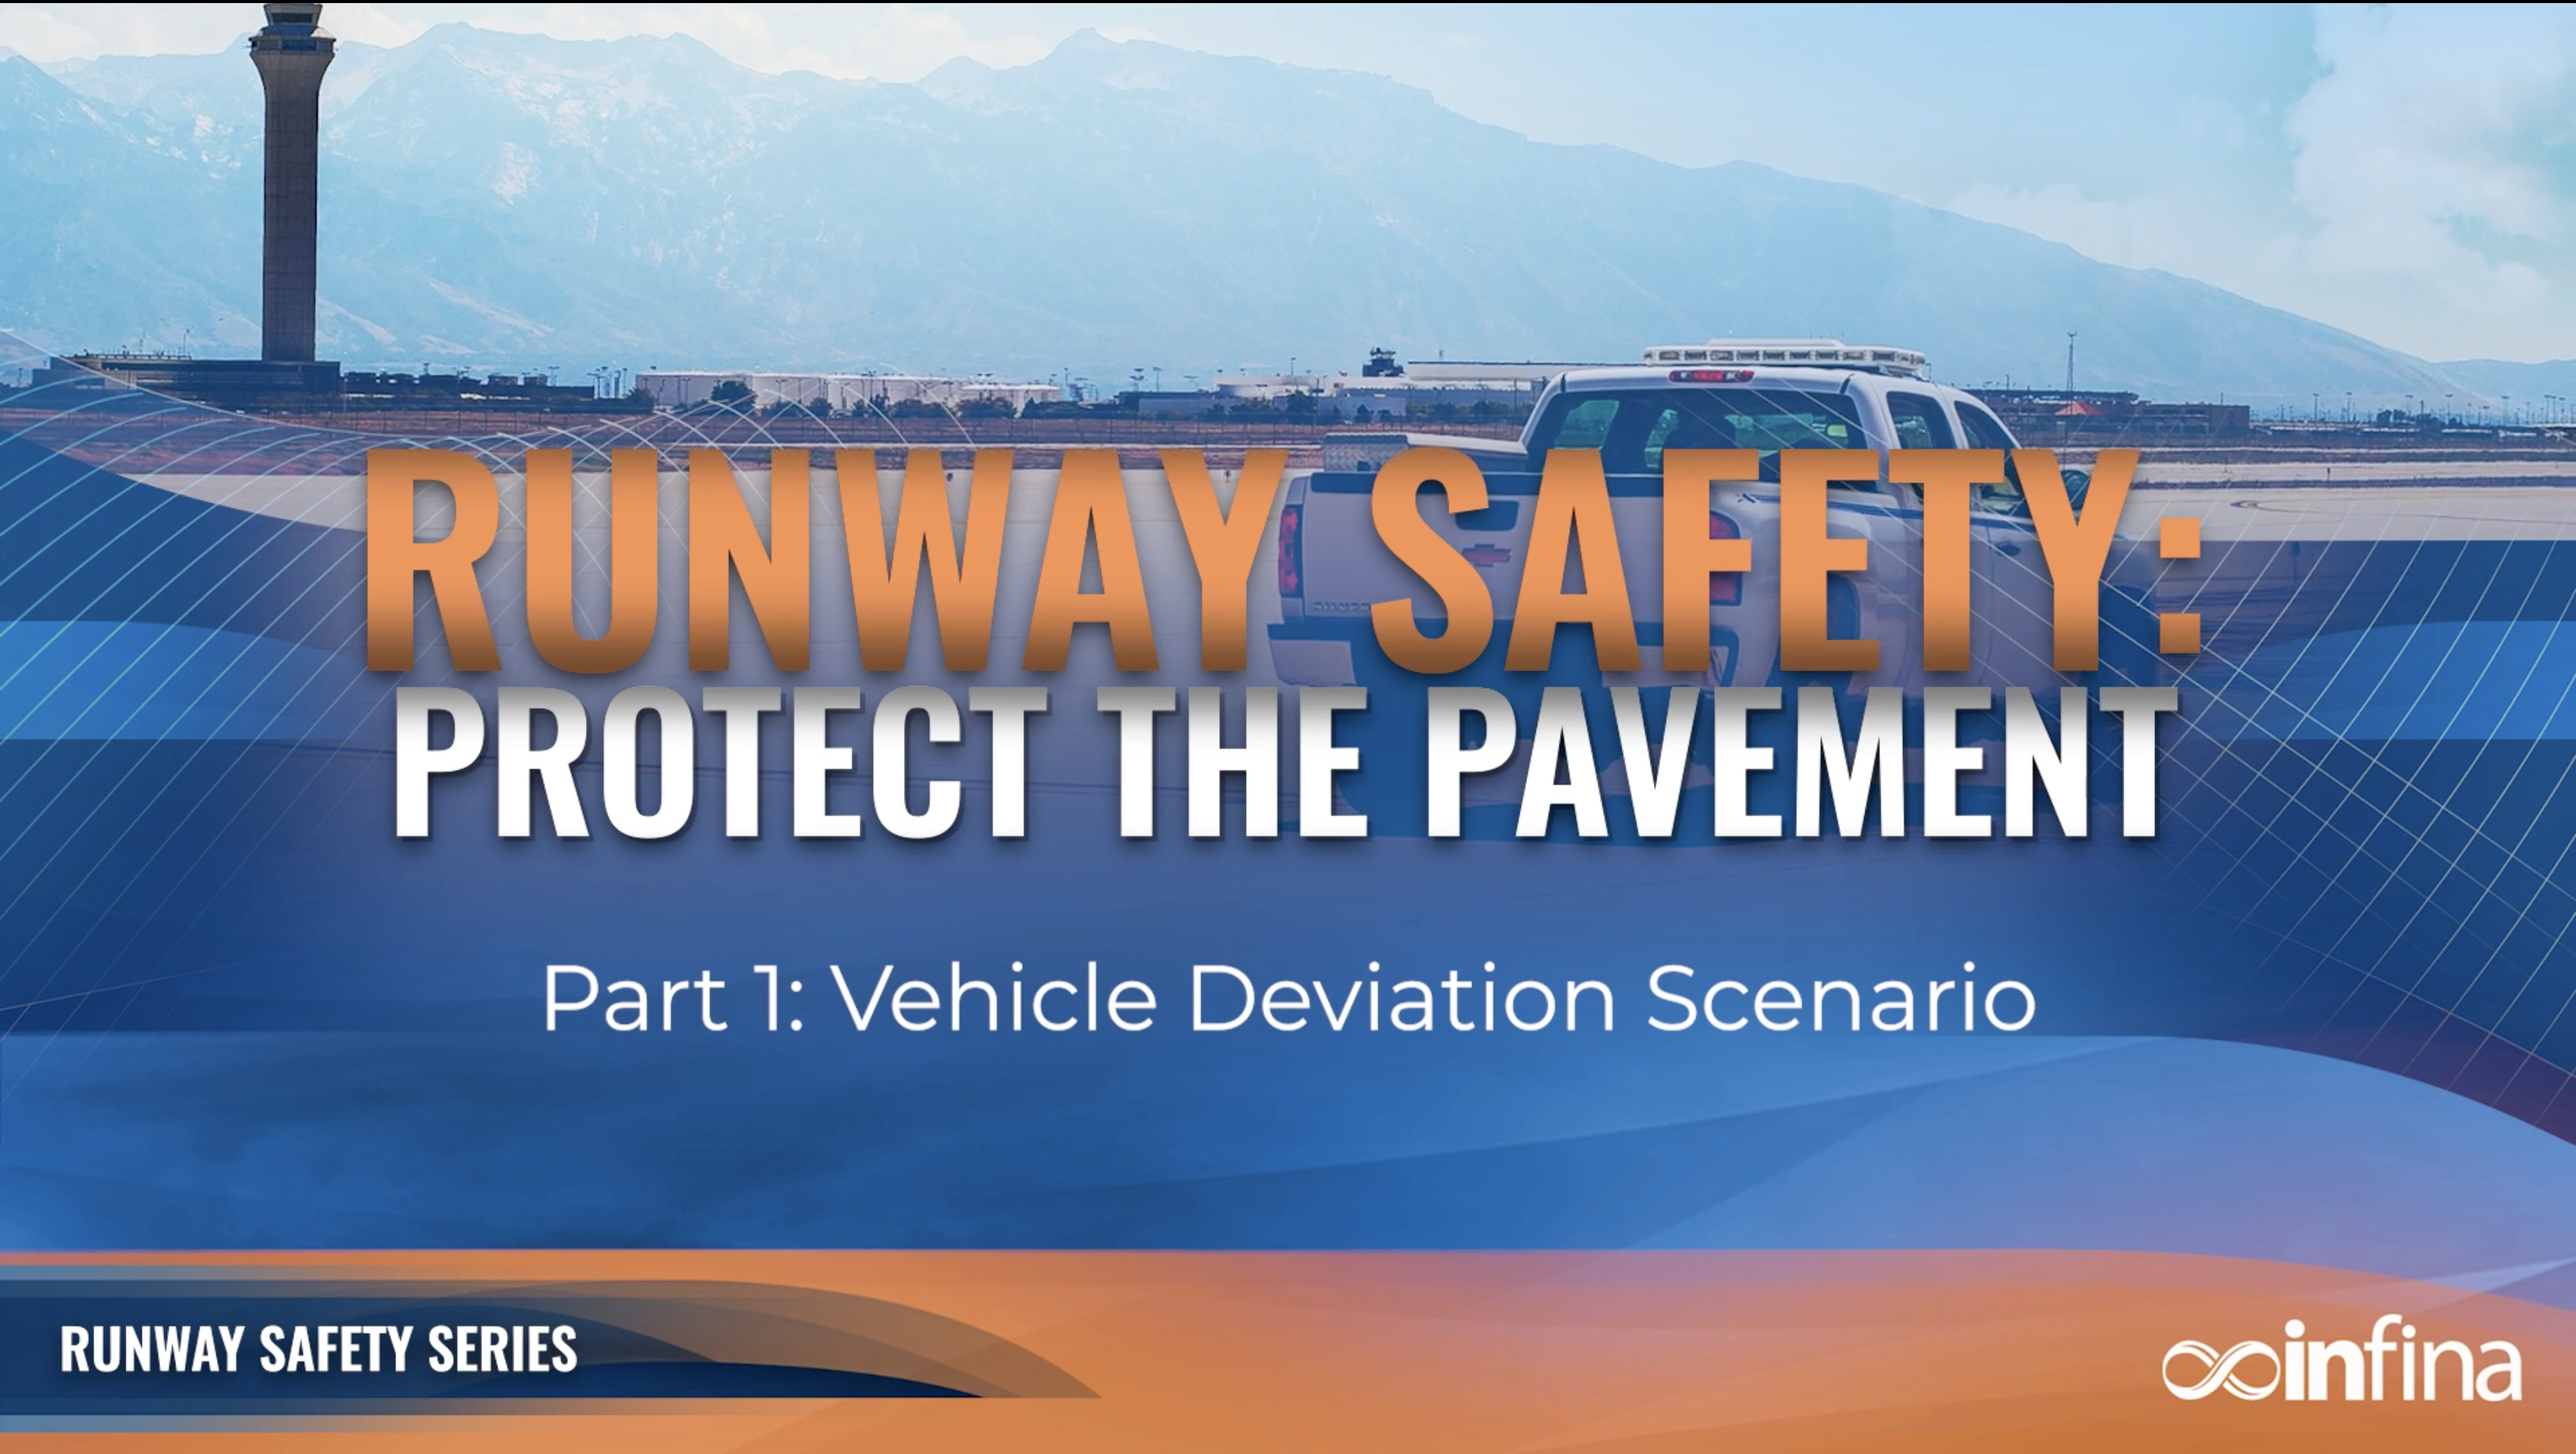 Runway Safety: Protect the Pavement Part 1 - Vehicle Devi...